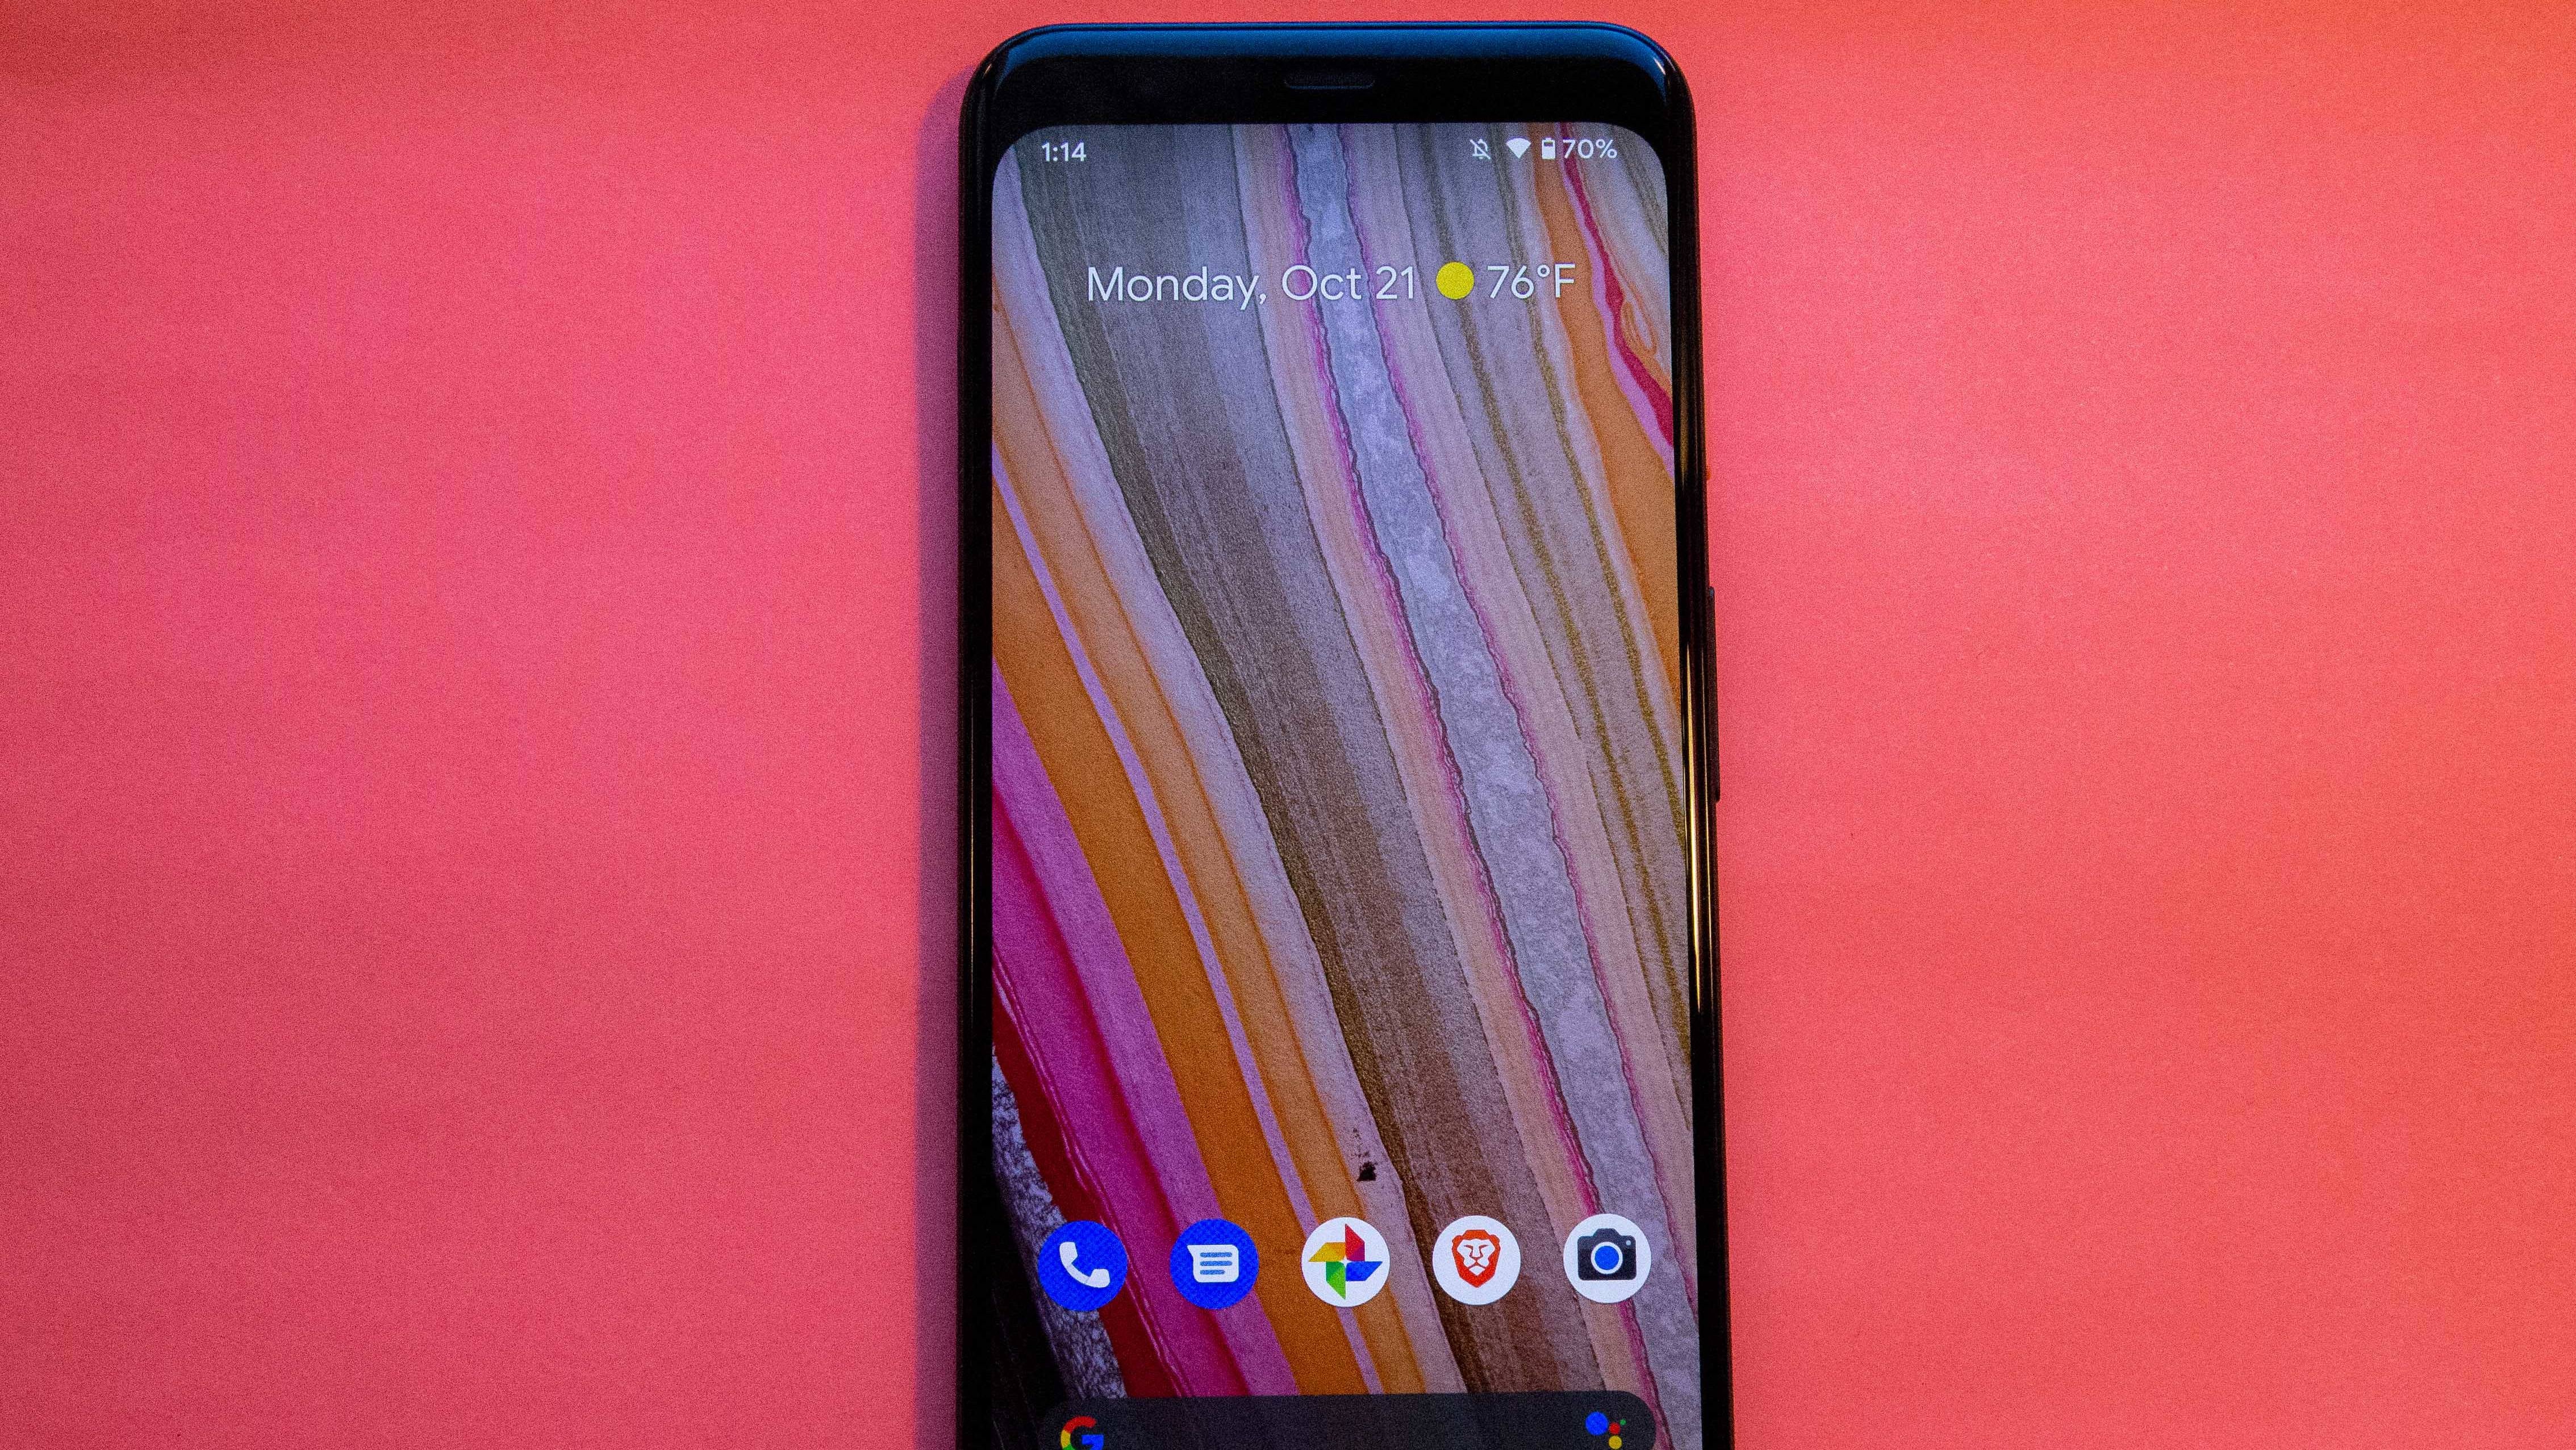 How Does Google’s Pixel 4 Stack Up To Other Flagship Phones?